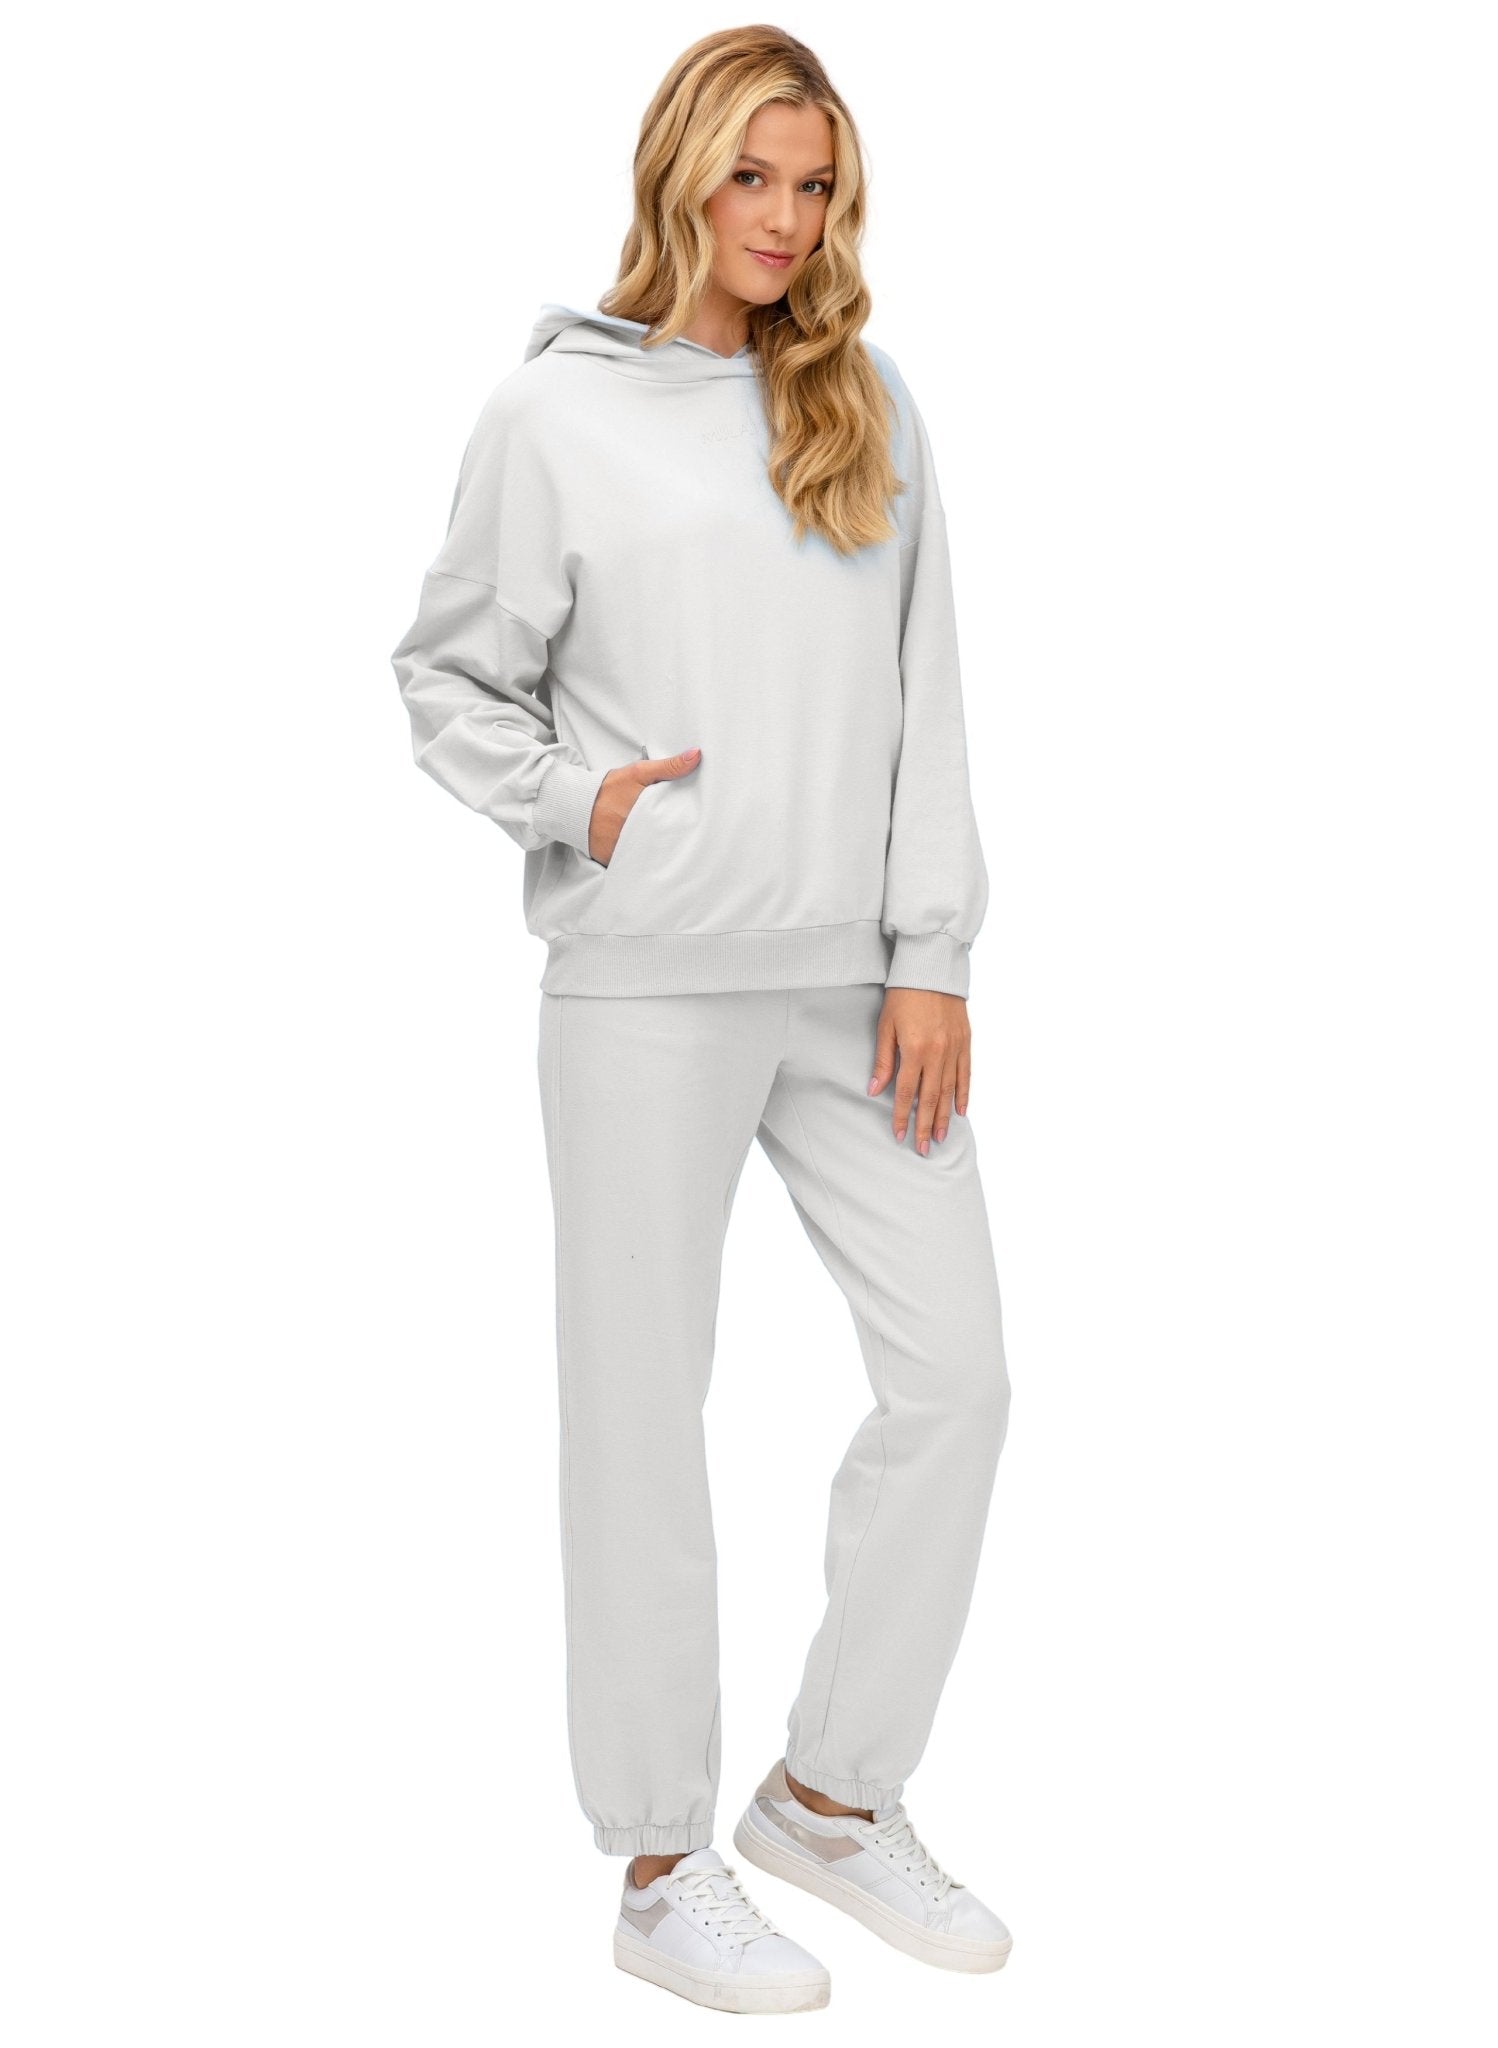 The Cozy Maternity Tracksuit - Ice Flow - Mums and Bumps